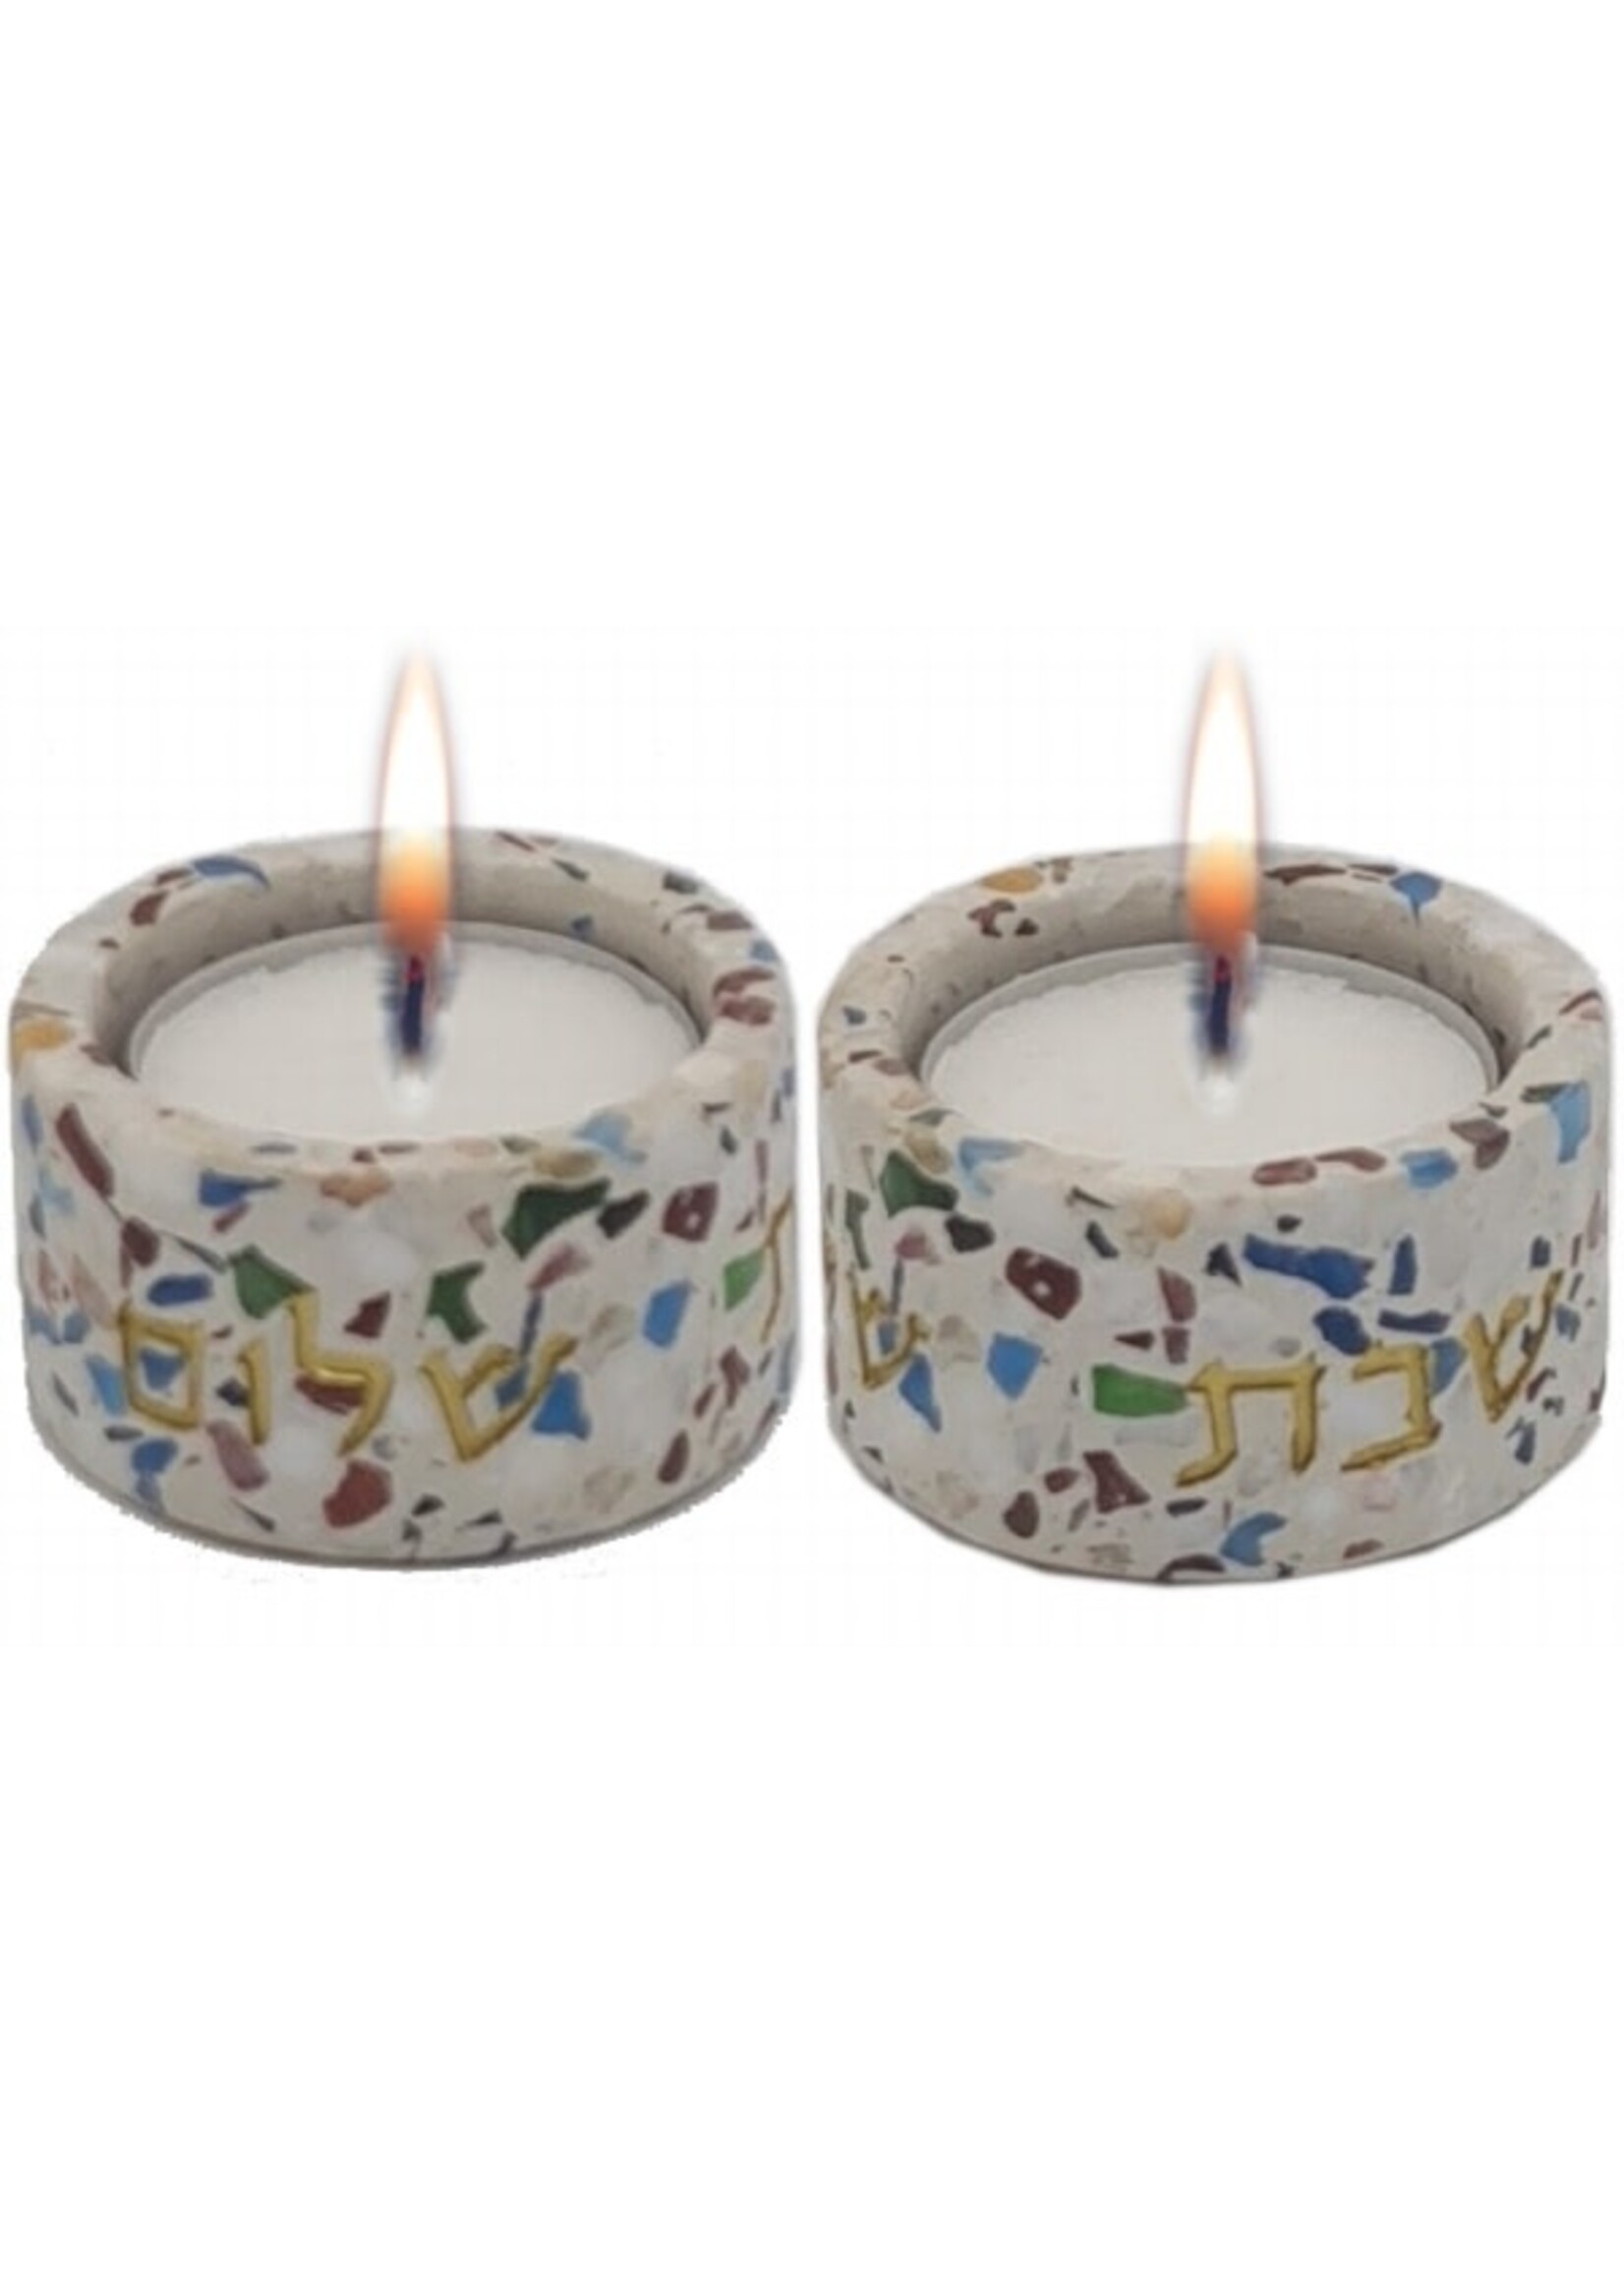 CANDLE HOLDER CEMENT - TERAZZO COLORS